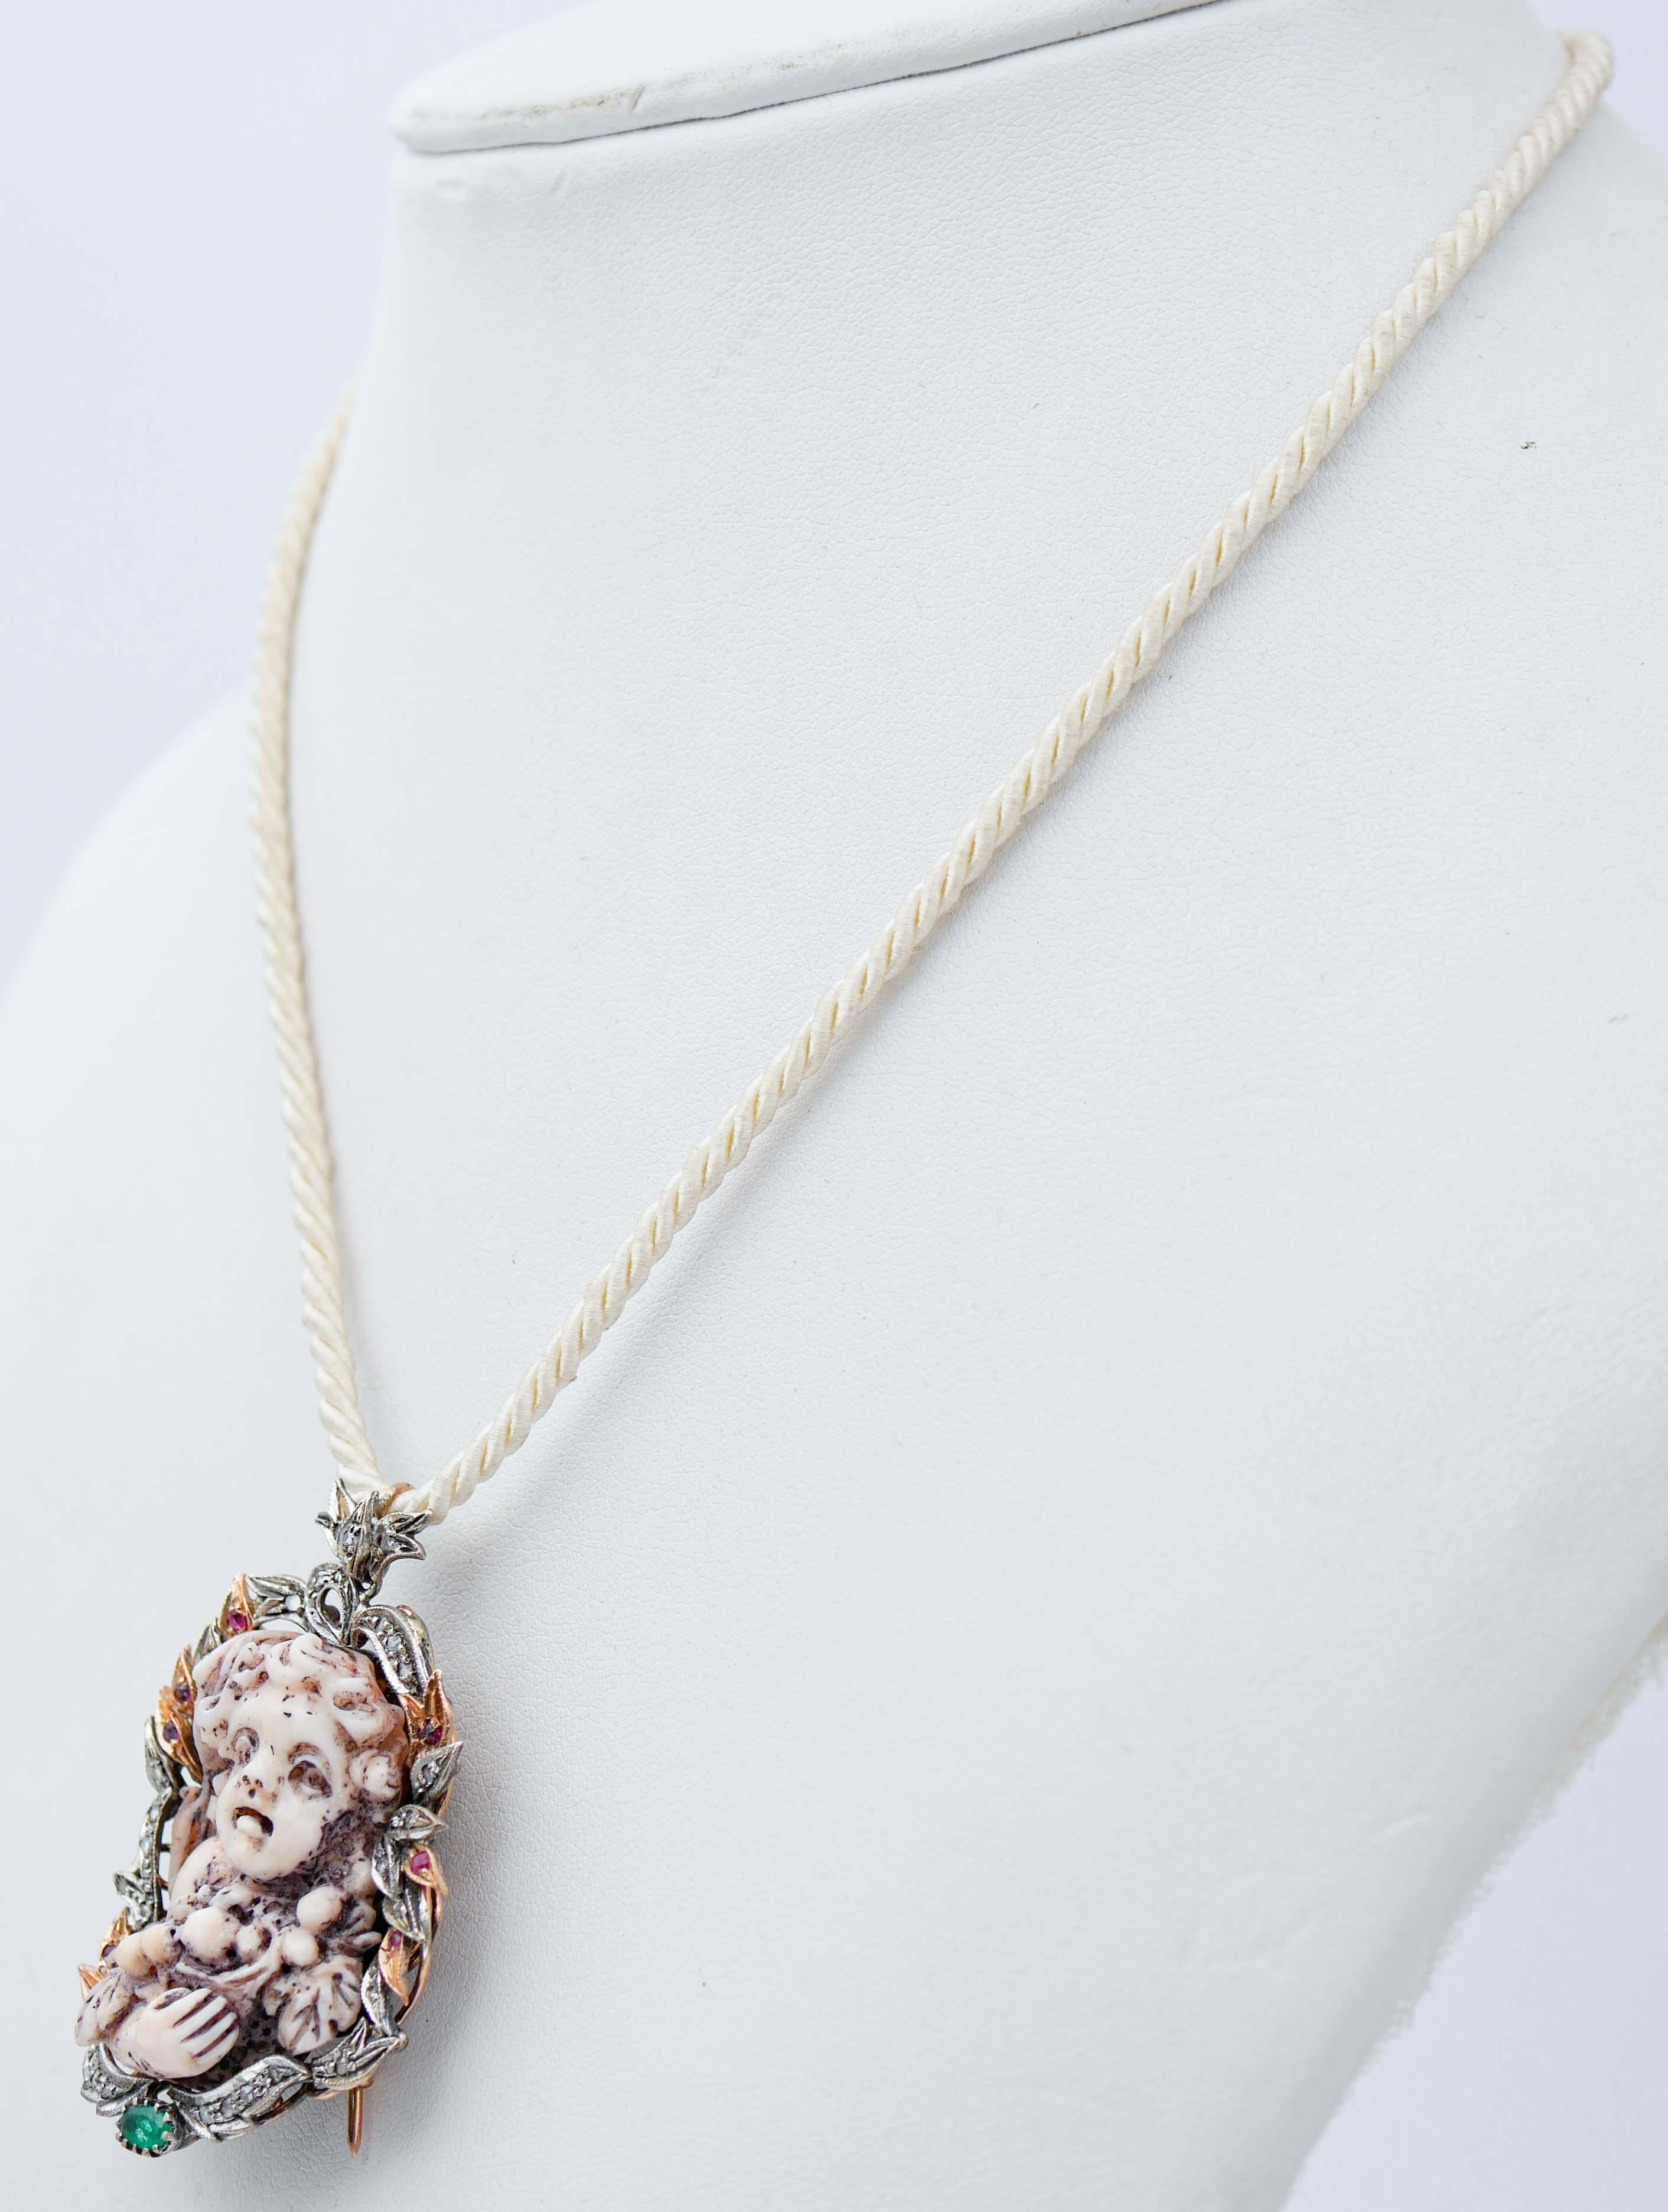 Retro Coral, Diamonds, Emeralds, Rubies, Rose Gold and Silver Brooch/Pendant Necklace. For Sale